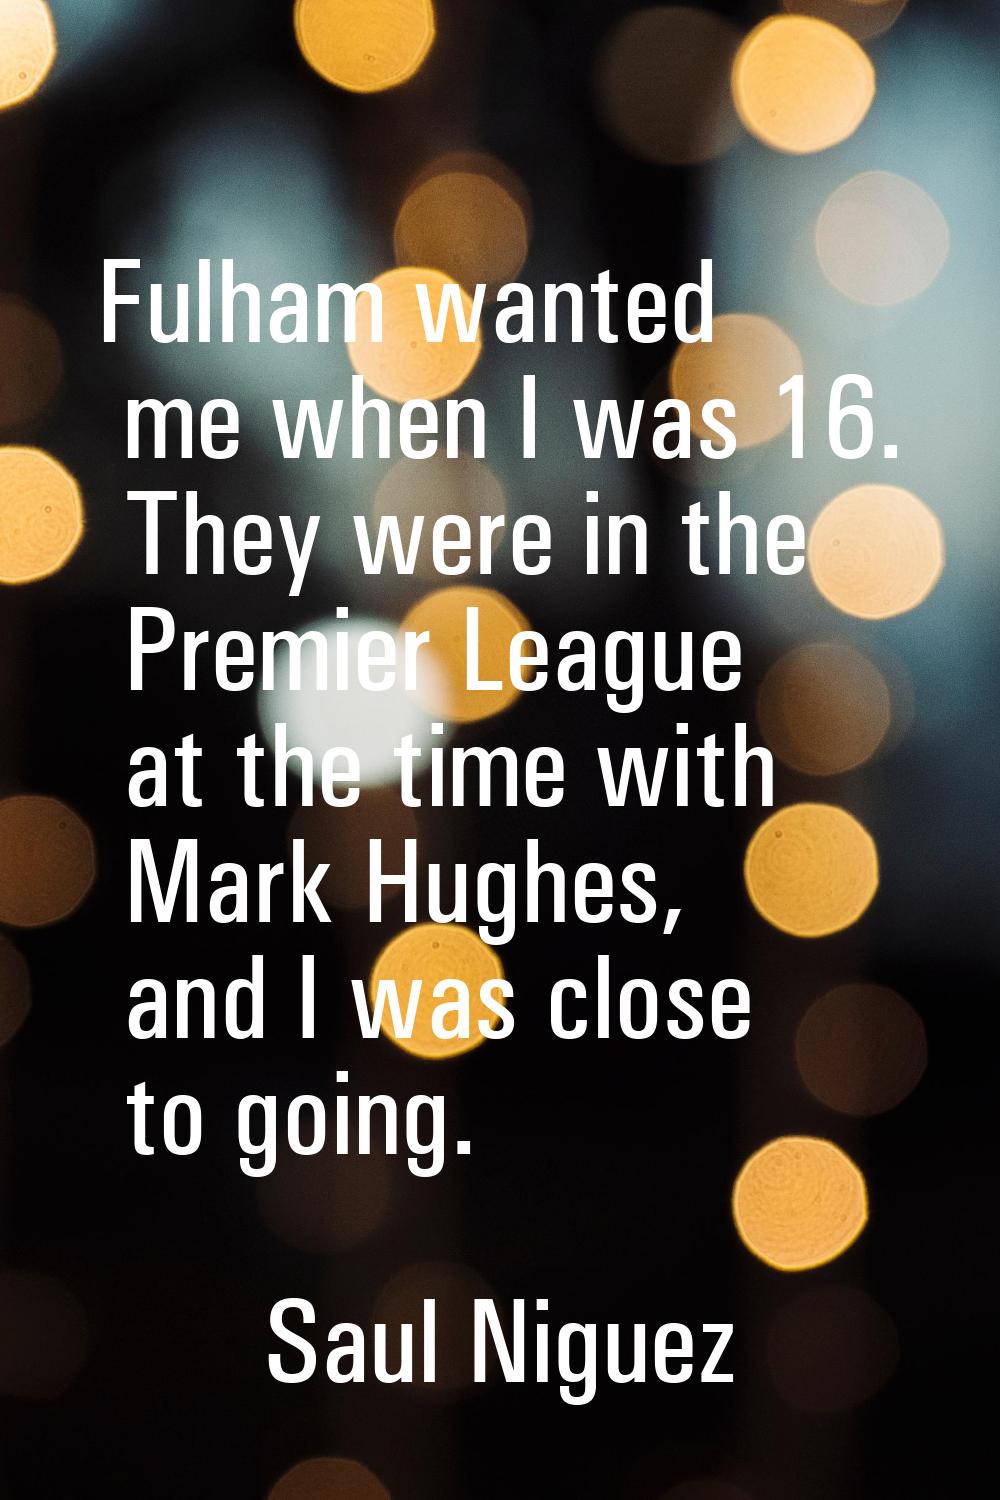 Fulham wanted me when I was 16. They were in the Premier League at the time with Mark Hughes, and I